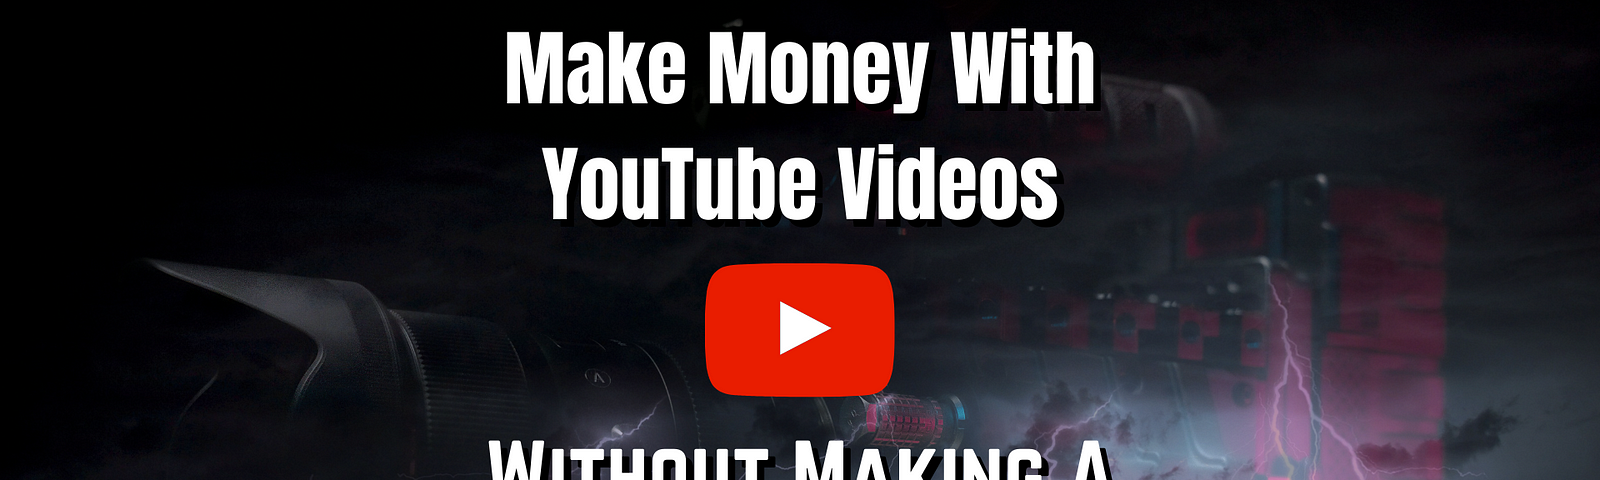 youtube videos to generate affiliate marketing sales without making videos